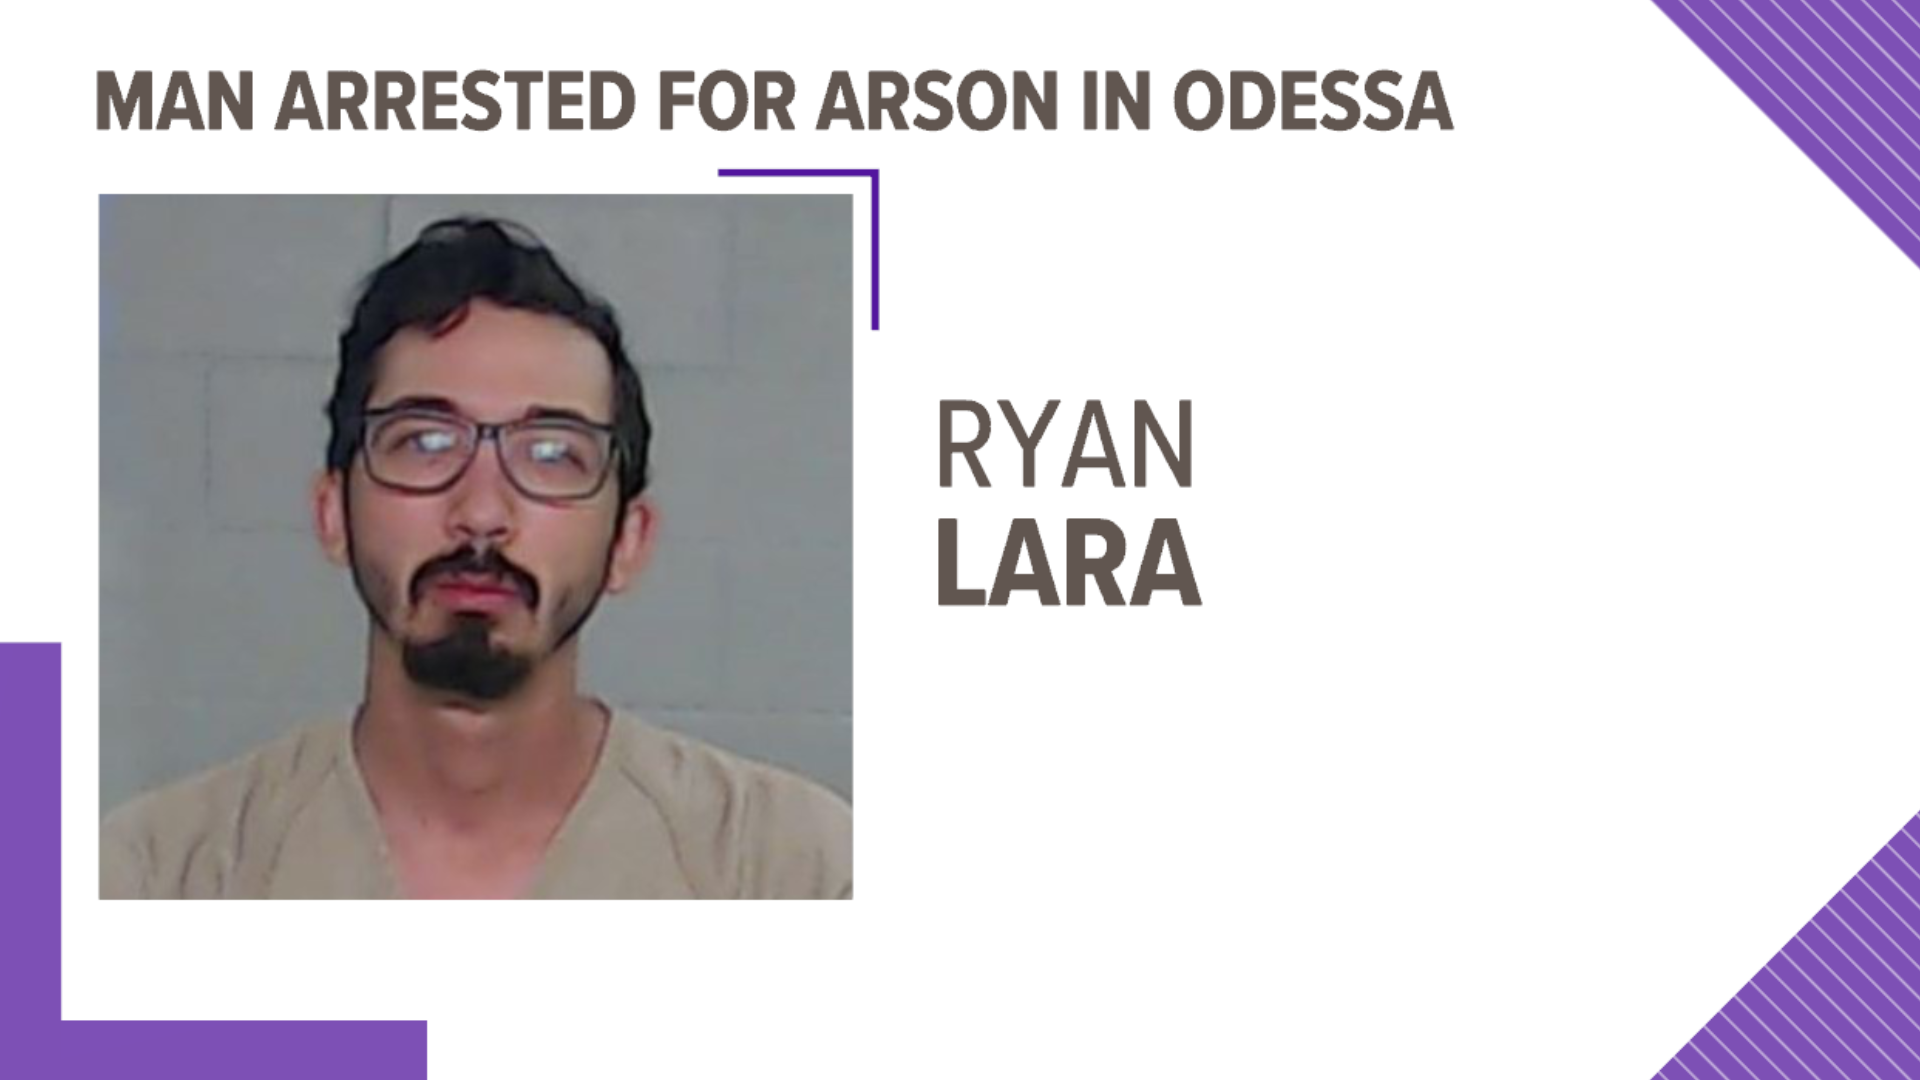 Ryan Lara is being charged with arson after investigation into a June fire at an Odessa Pilot Travel Center.